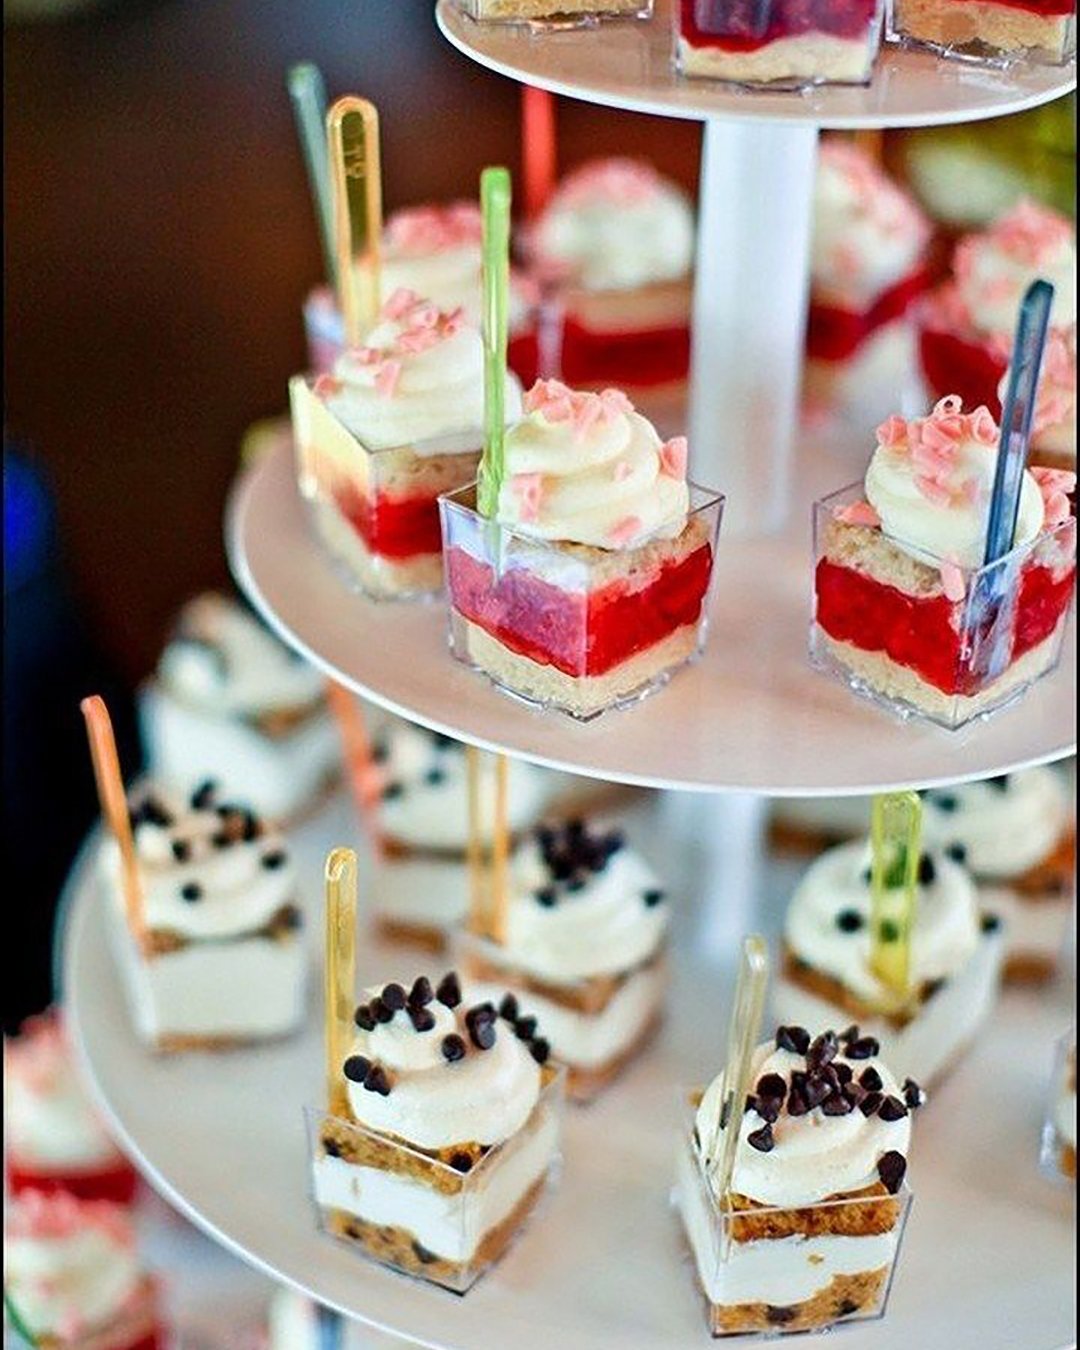 non traditional wedding dessert ideas tasty wedding shooters with berries azulphotography